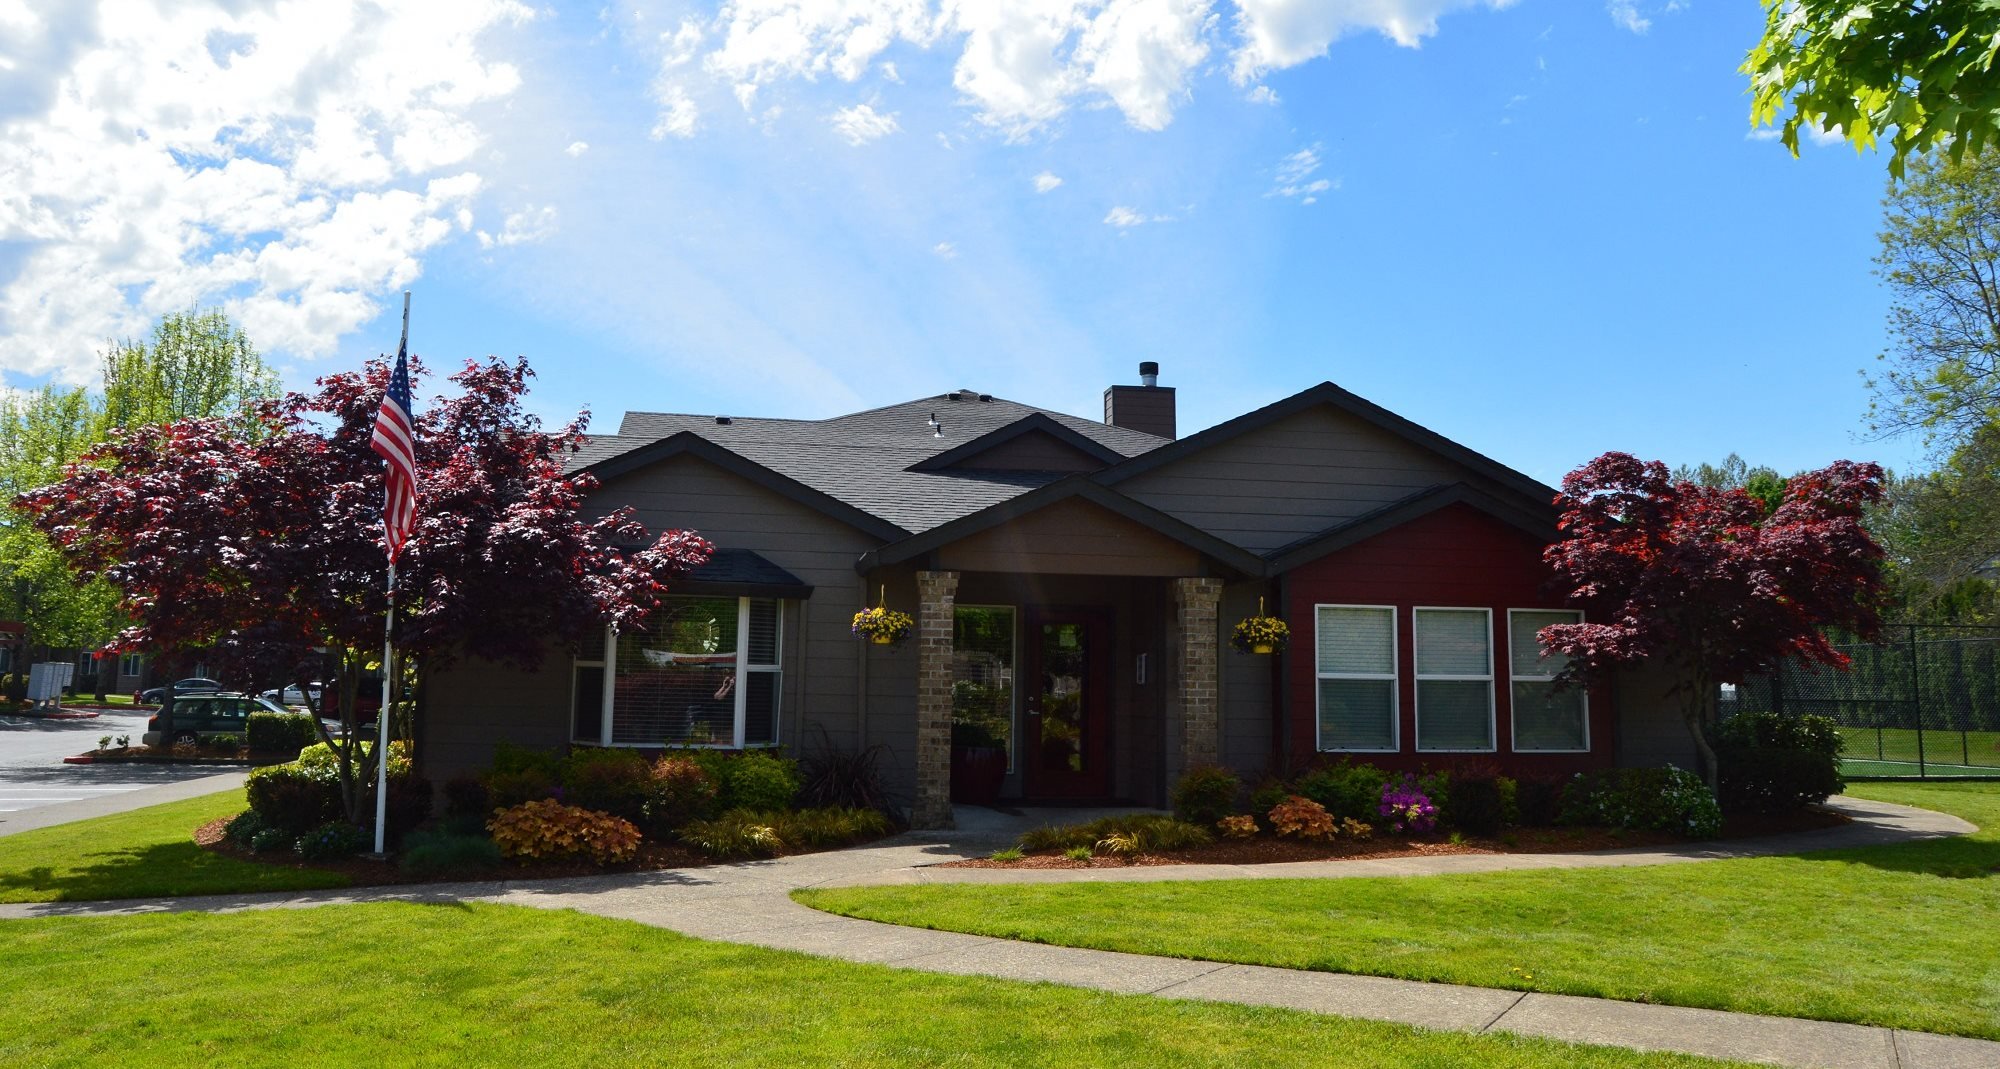 The Township | Apartments For Rent in Canby, OR2000 x 1069